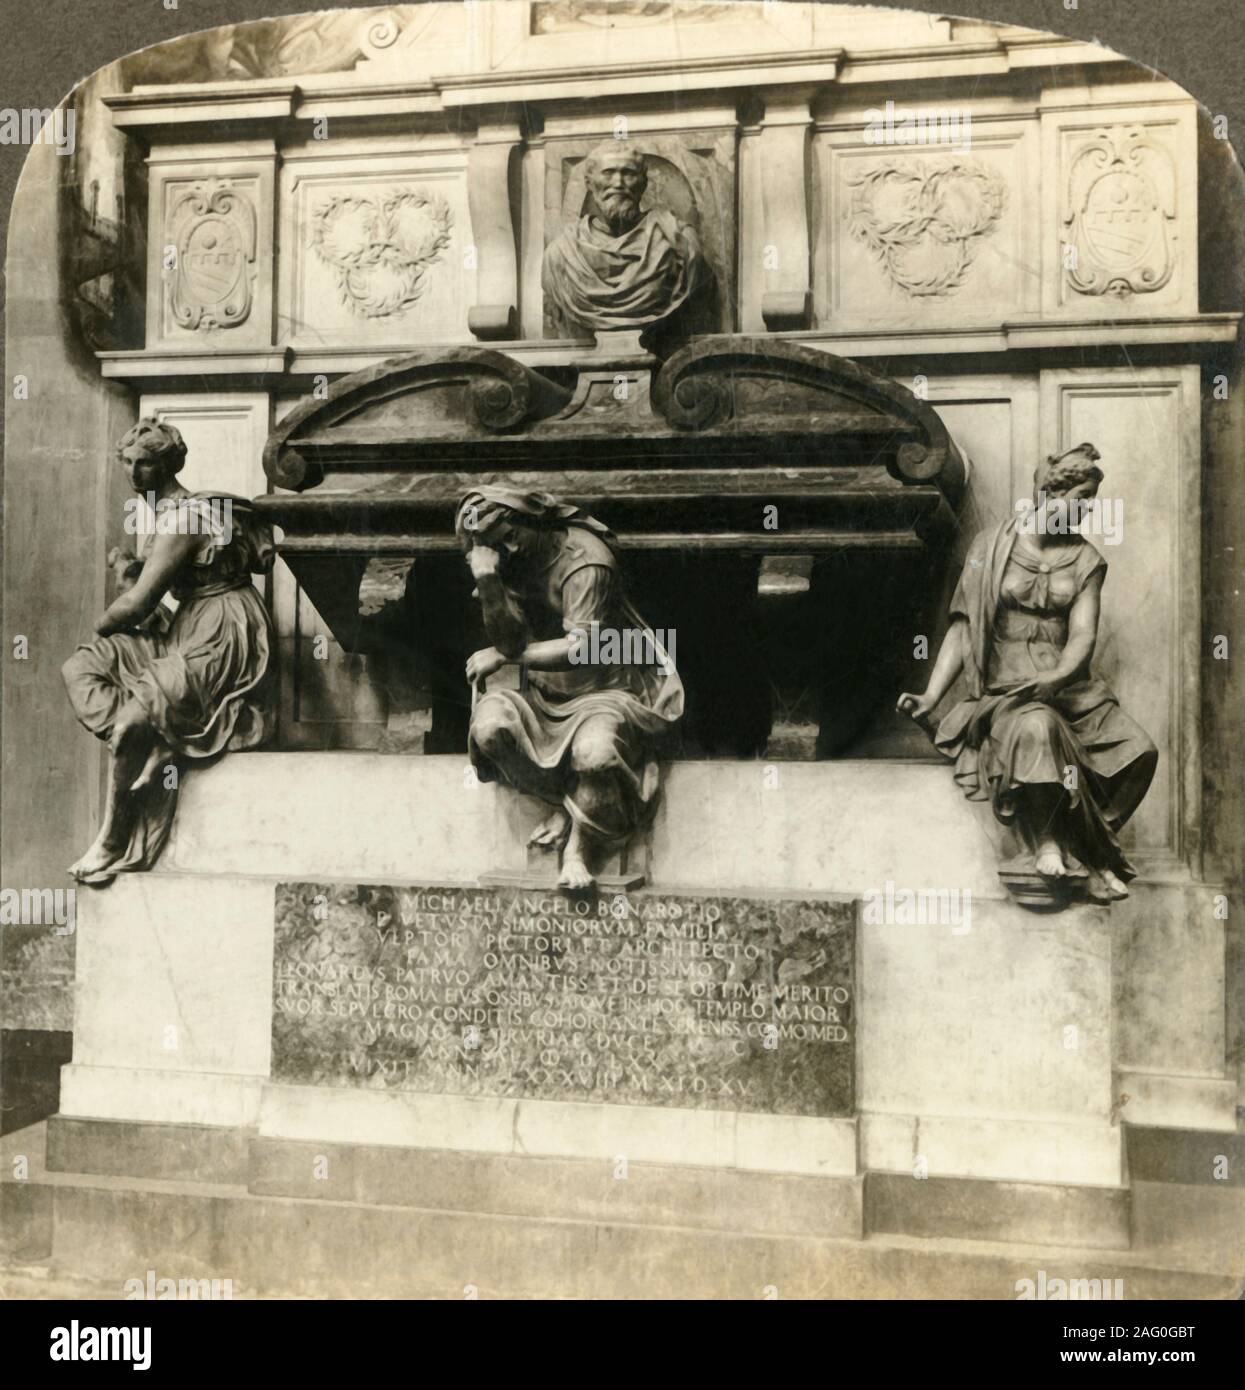 'Tomb of Michael Angelo in Church of Santa Croce, Florence, Italy', c1909. Tomb of Michelangelo, Italian sculptor, painter, architect and poet of the High Renaissance with sculpture by Valerio Cioli, Iovanni Bandini, and Battista Lorenzi. To be viewed on a Sun Sculpture stereoscope made by Underwood &amp; Underwood. [The Rose Stereograph Company, Melbourne, Sydney, Wellington &amp; London, c1909] Stock Photo